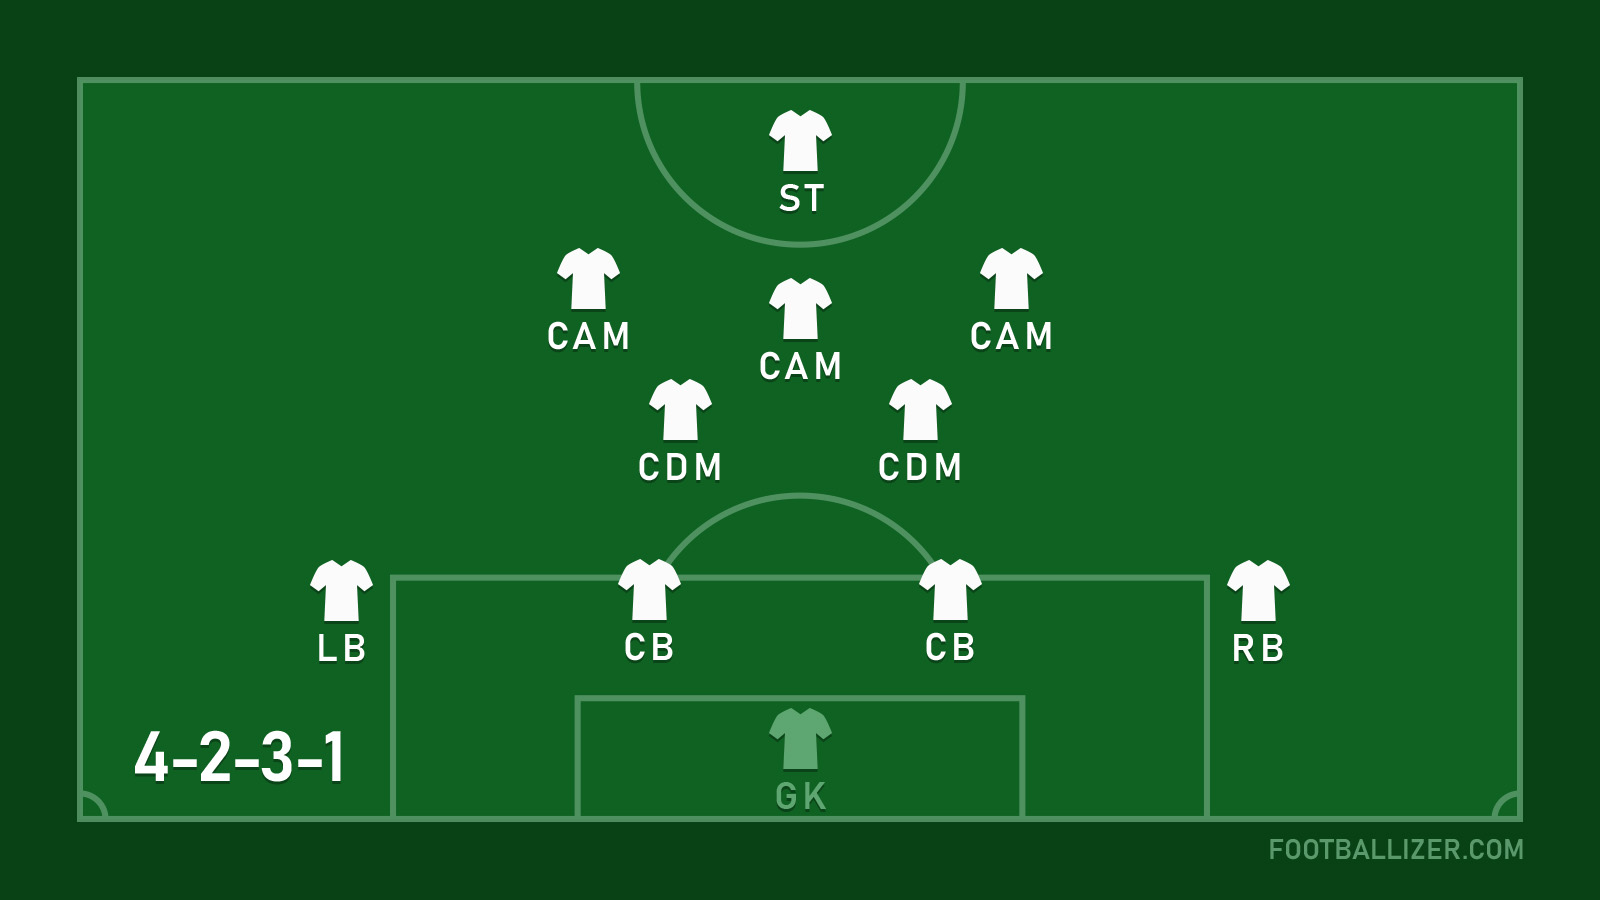 4-2-3-1 FORMATION